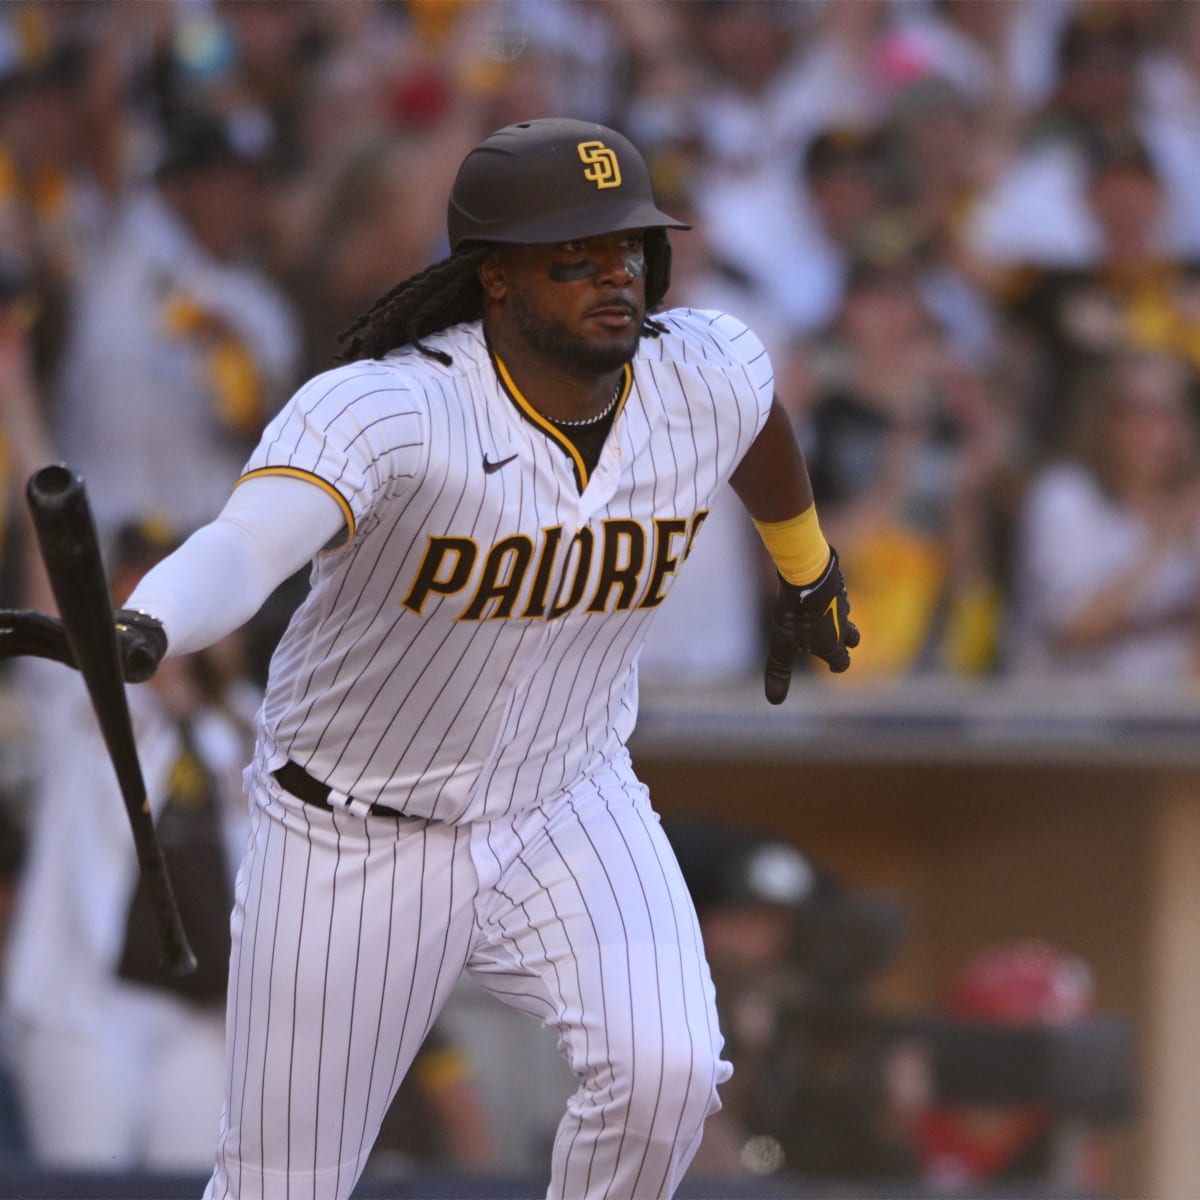 Photo: Guardians Josh Bell Reaches for Foul Ball - PIT2023071927 